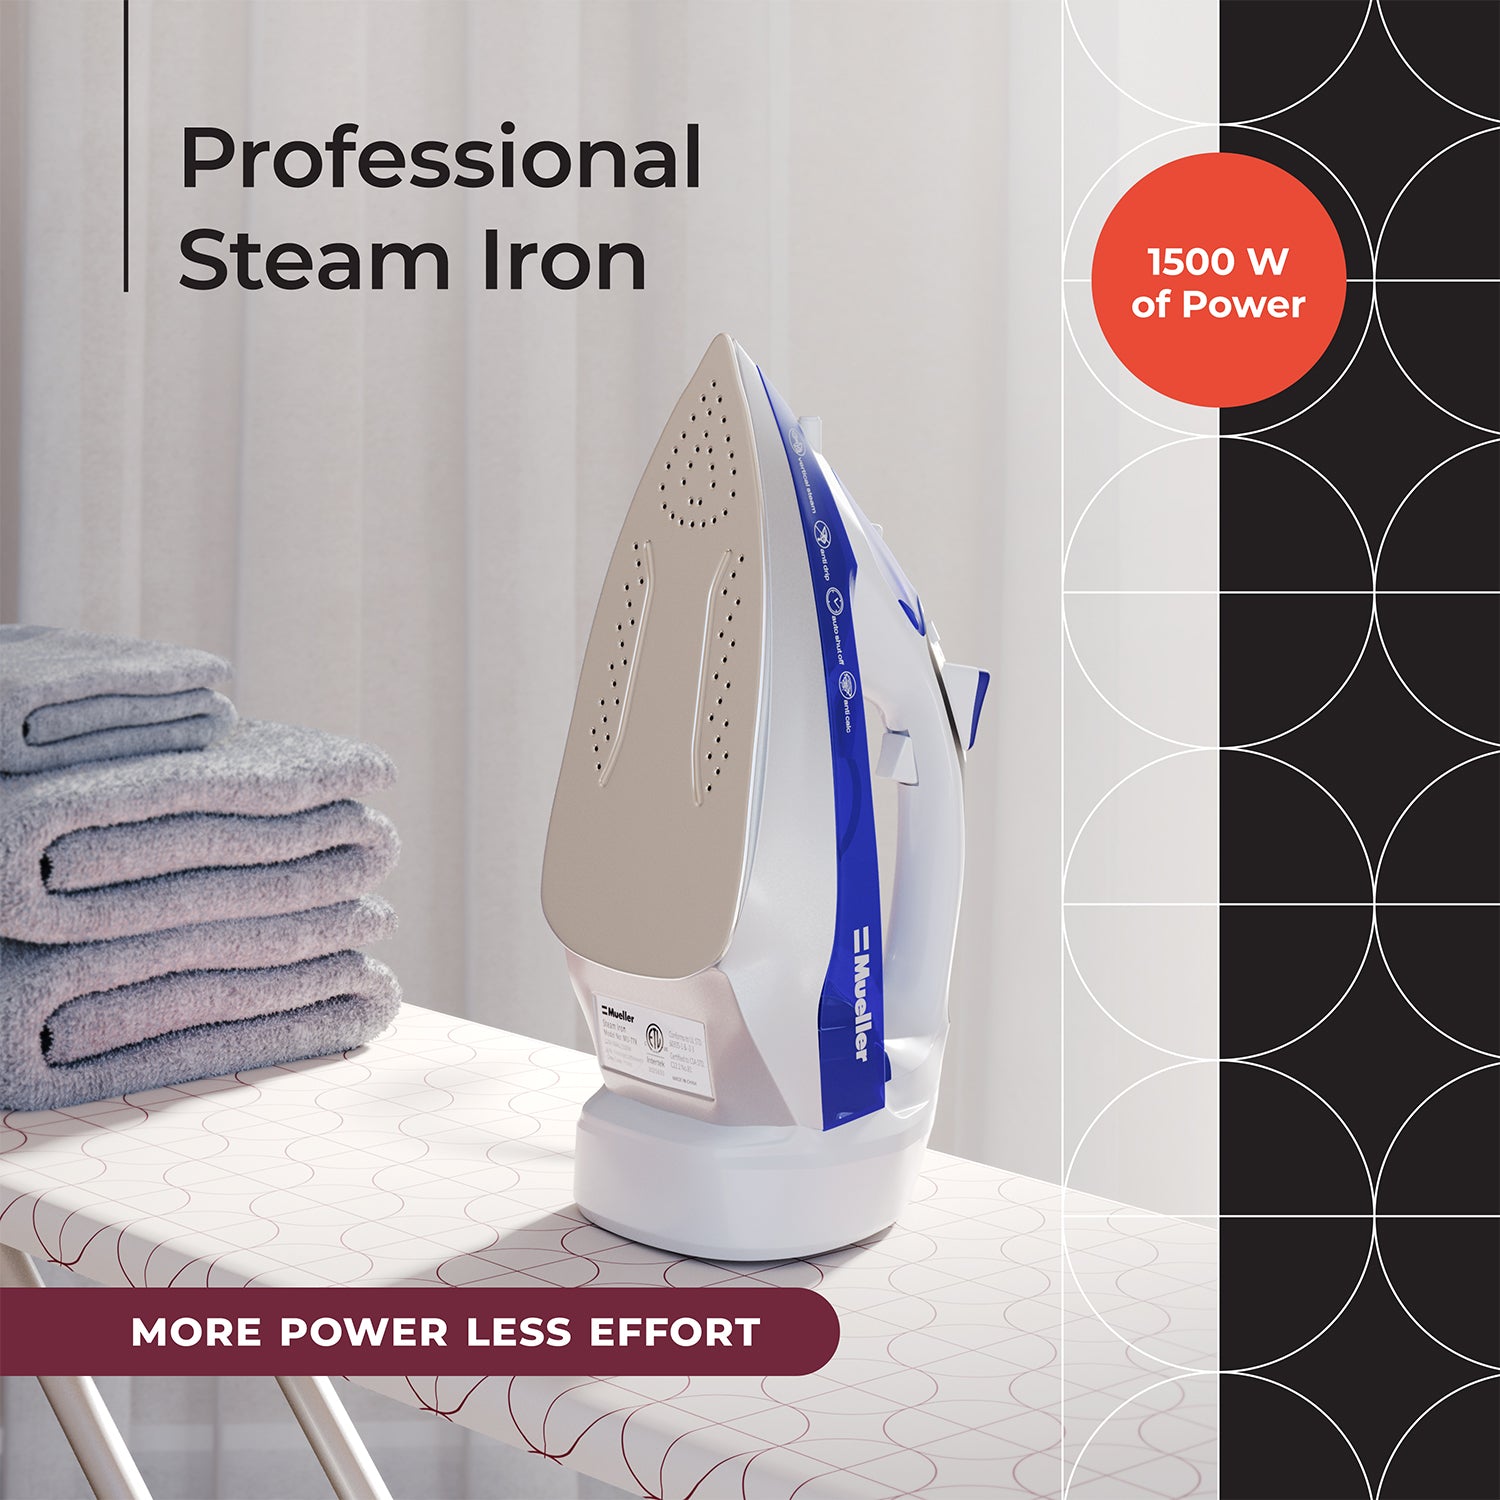 Mueller Professional Grade Steam Iron, Retractable Cord for Easy Storage, Shot of Steam/Vertical Shot, 8 ft Cord, 3 Way Auto Shut Off, Self Clean